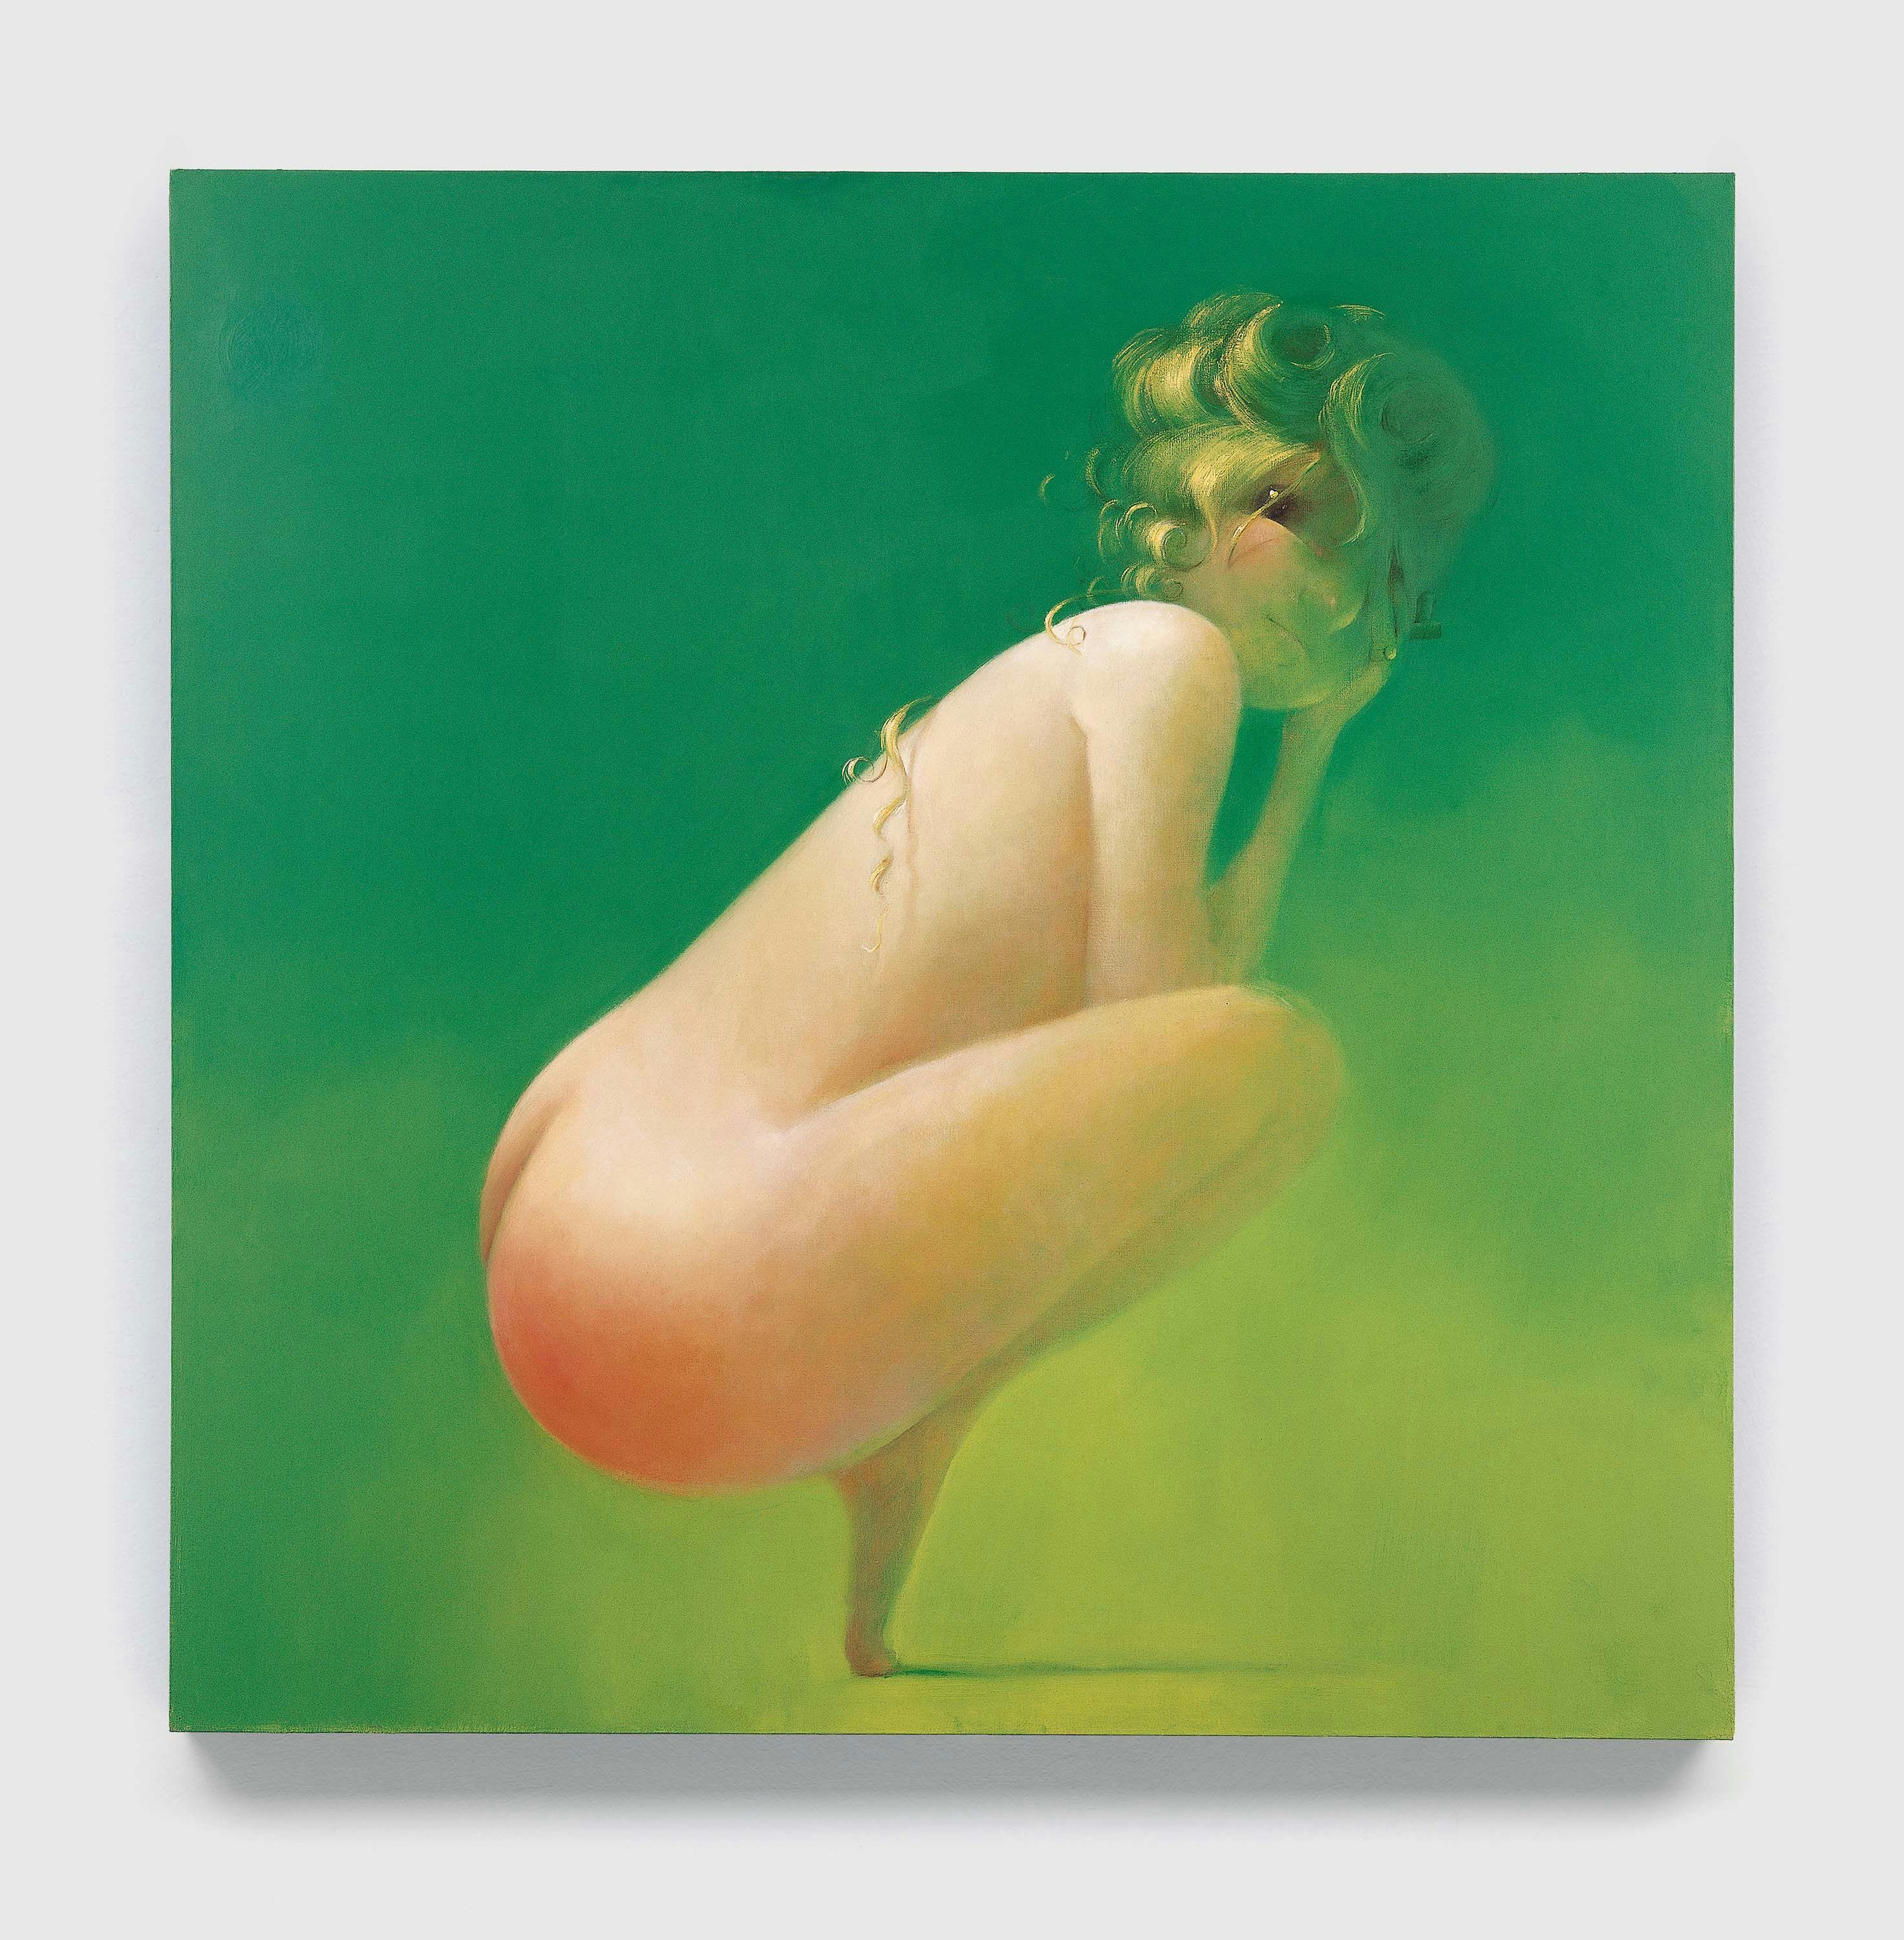 A painting by Lisa Yuskavage, titled Big Blonde with Hairdo, dated 1994.